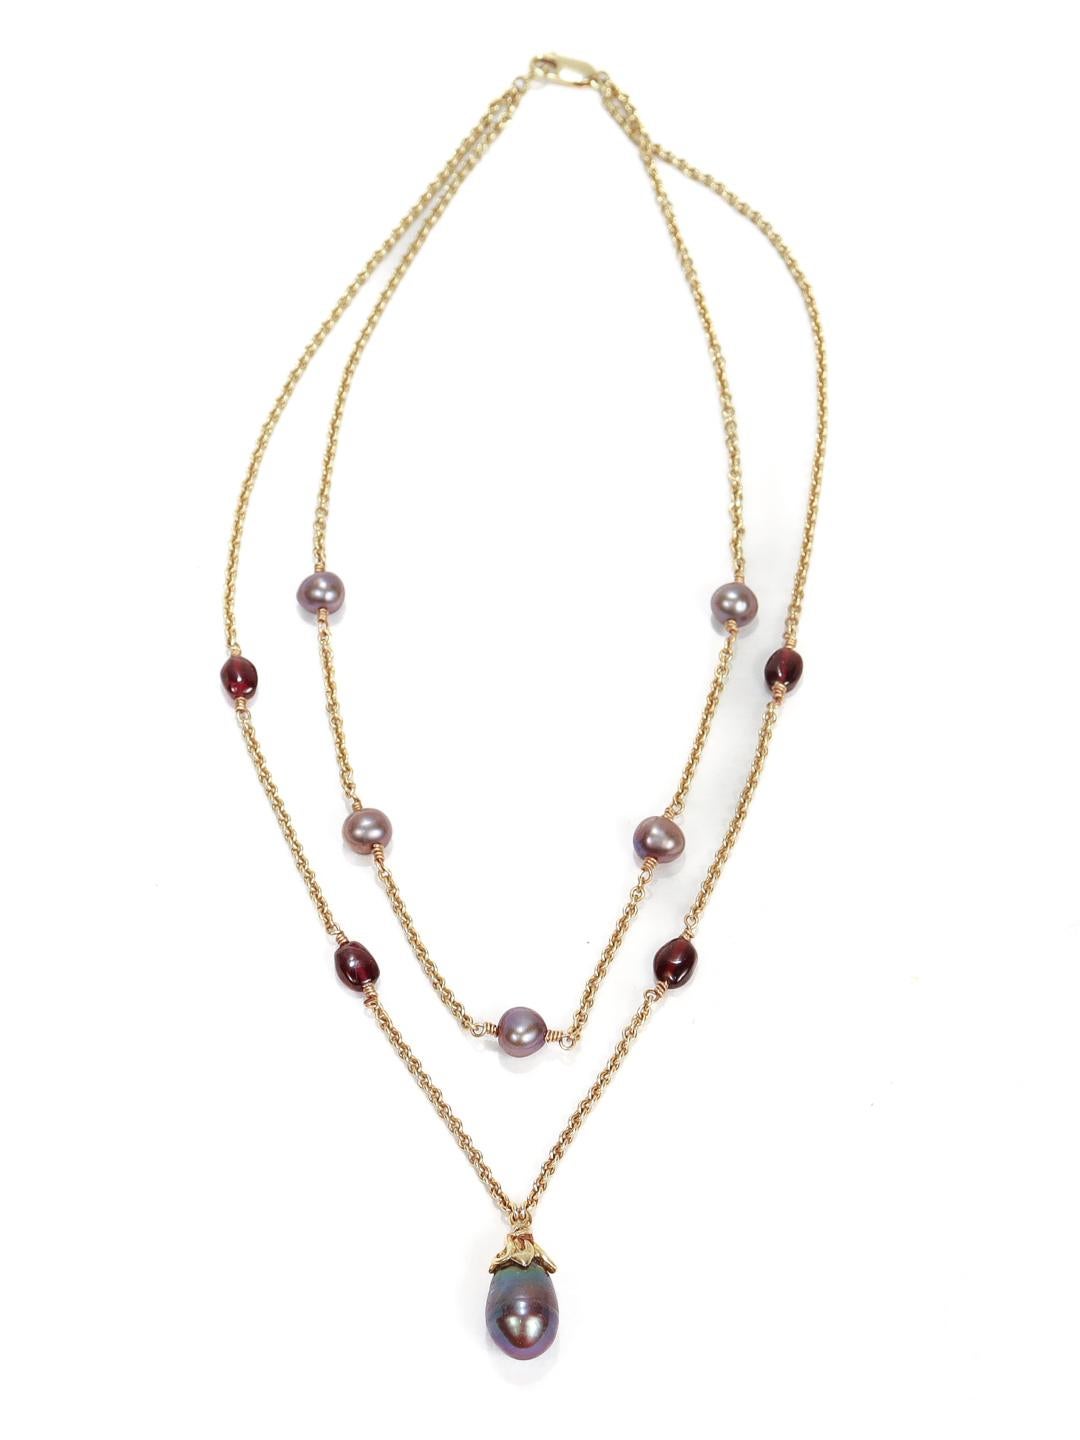 Lazaro Diaz Layered Double Chain 18k Gold, Amethyst, & Tahitian Pearl Necklace For Sale 2